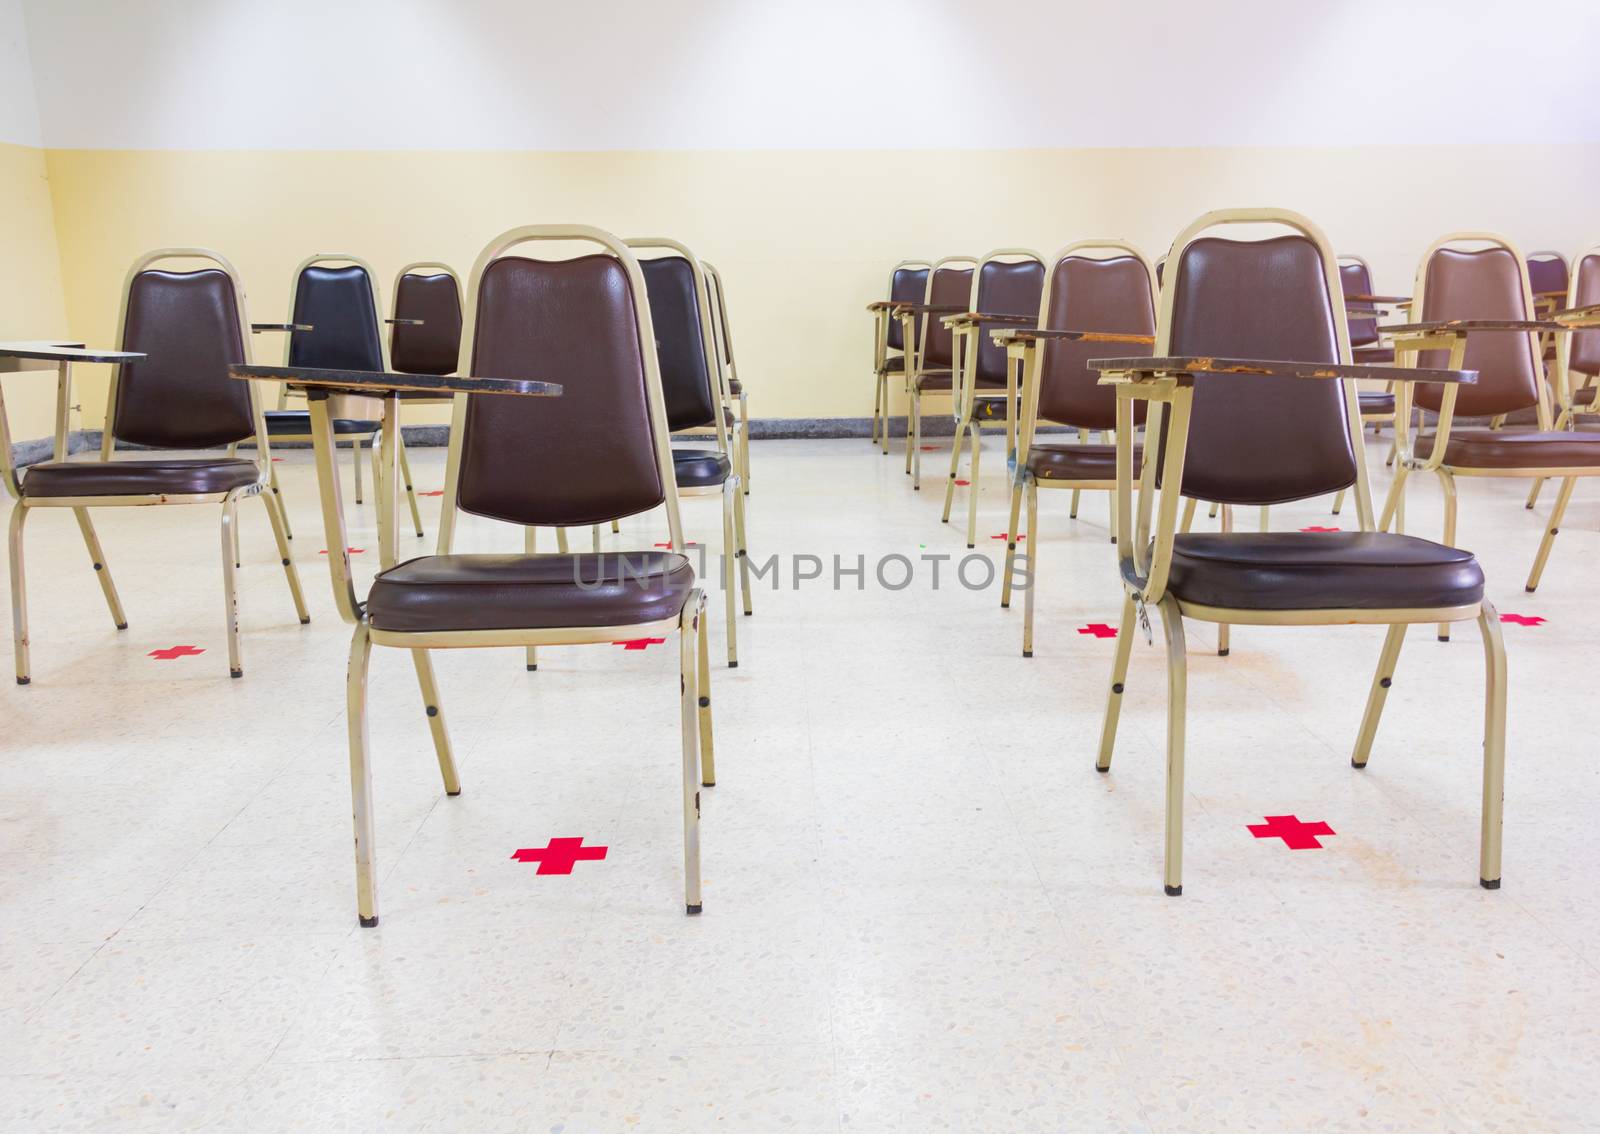 old lecture chairs empty in classroom with social distancing by pramot